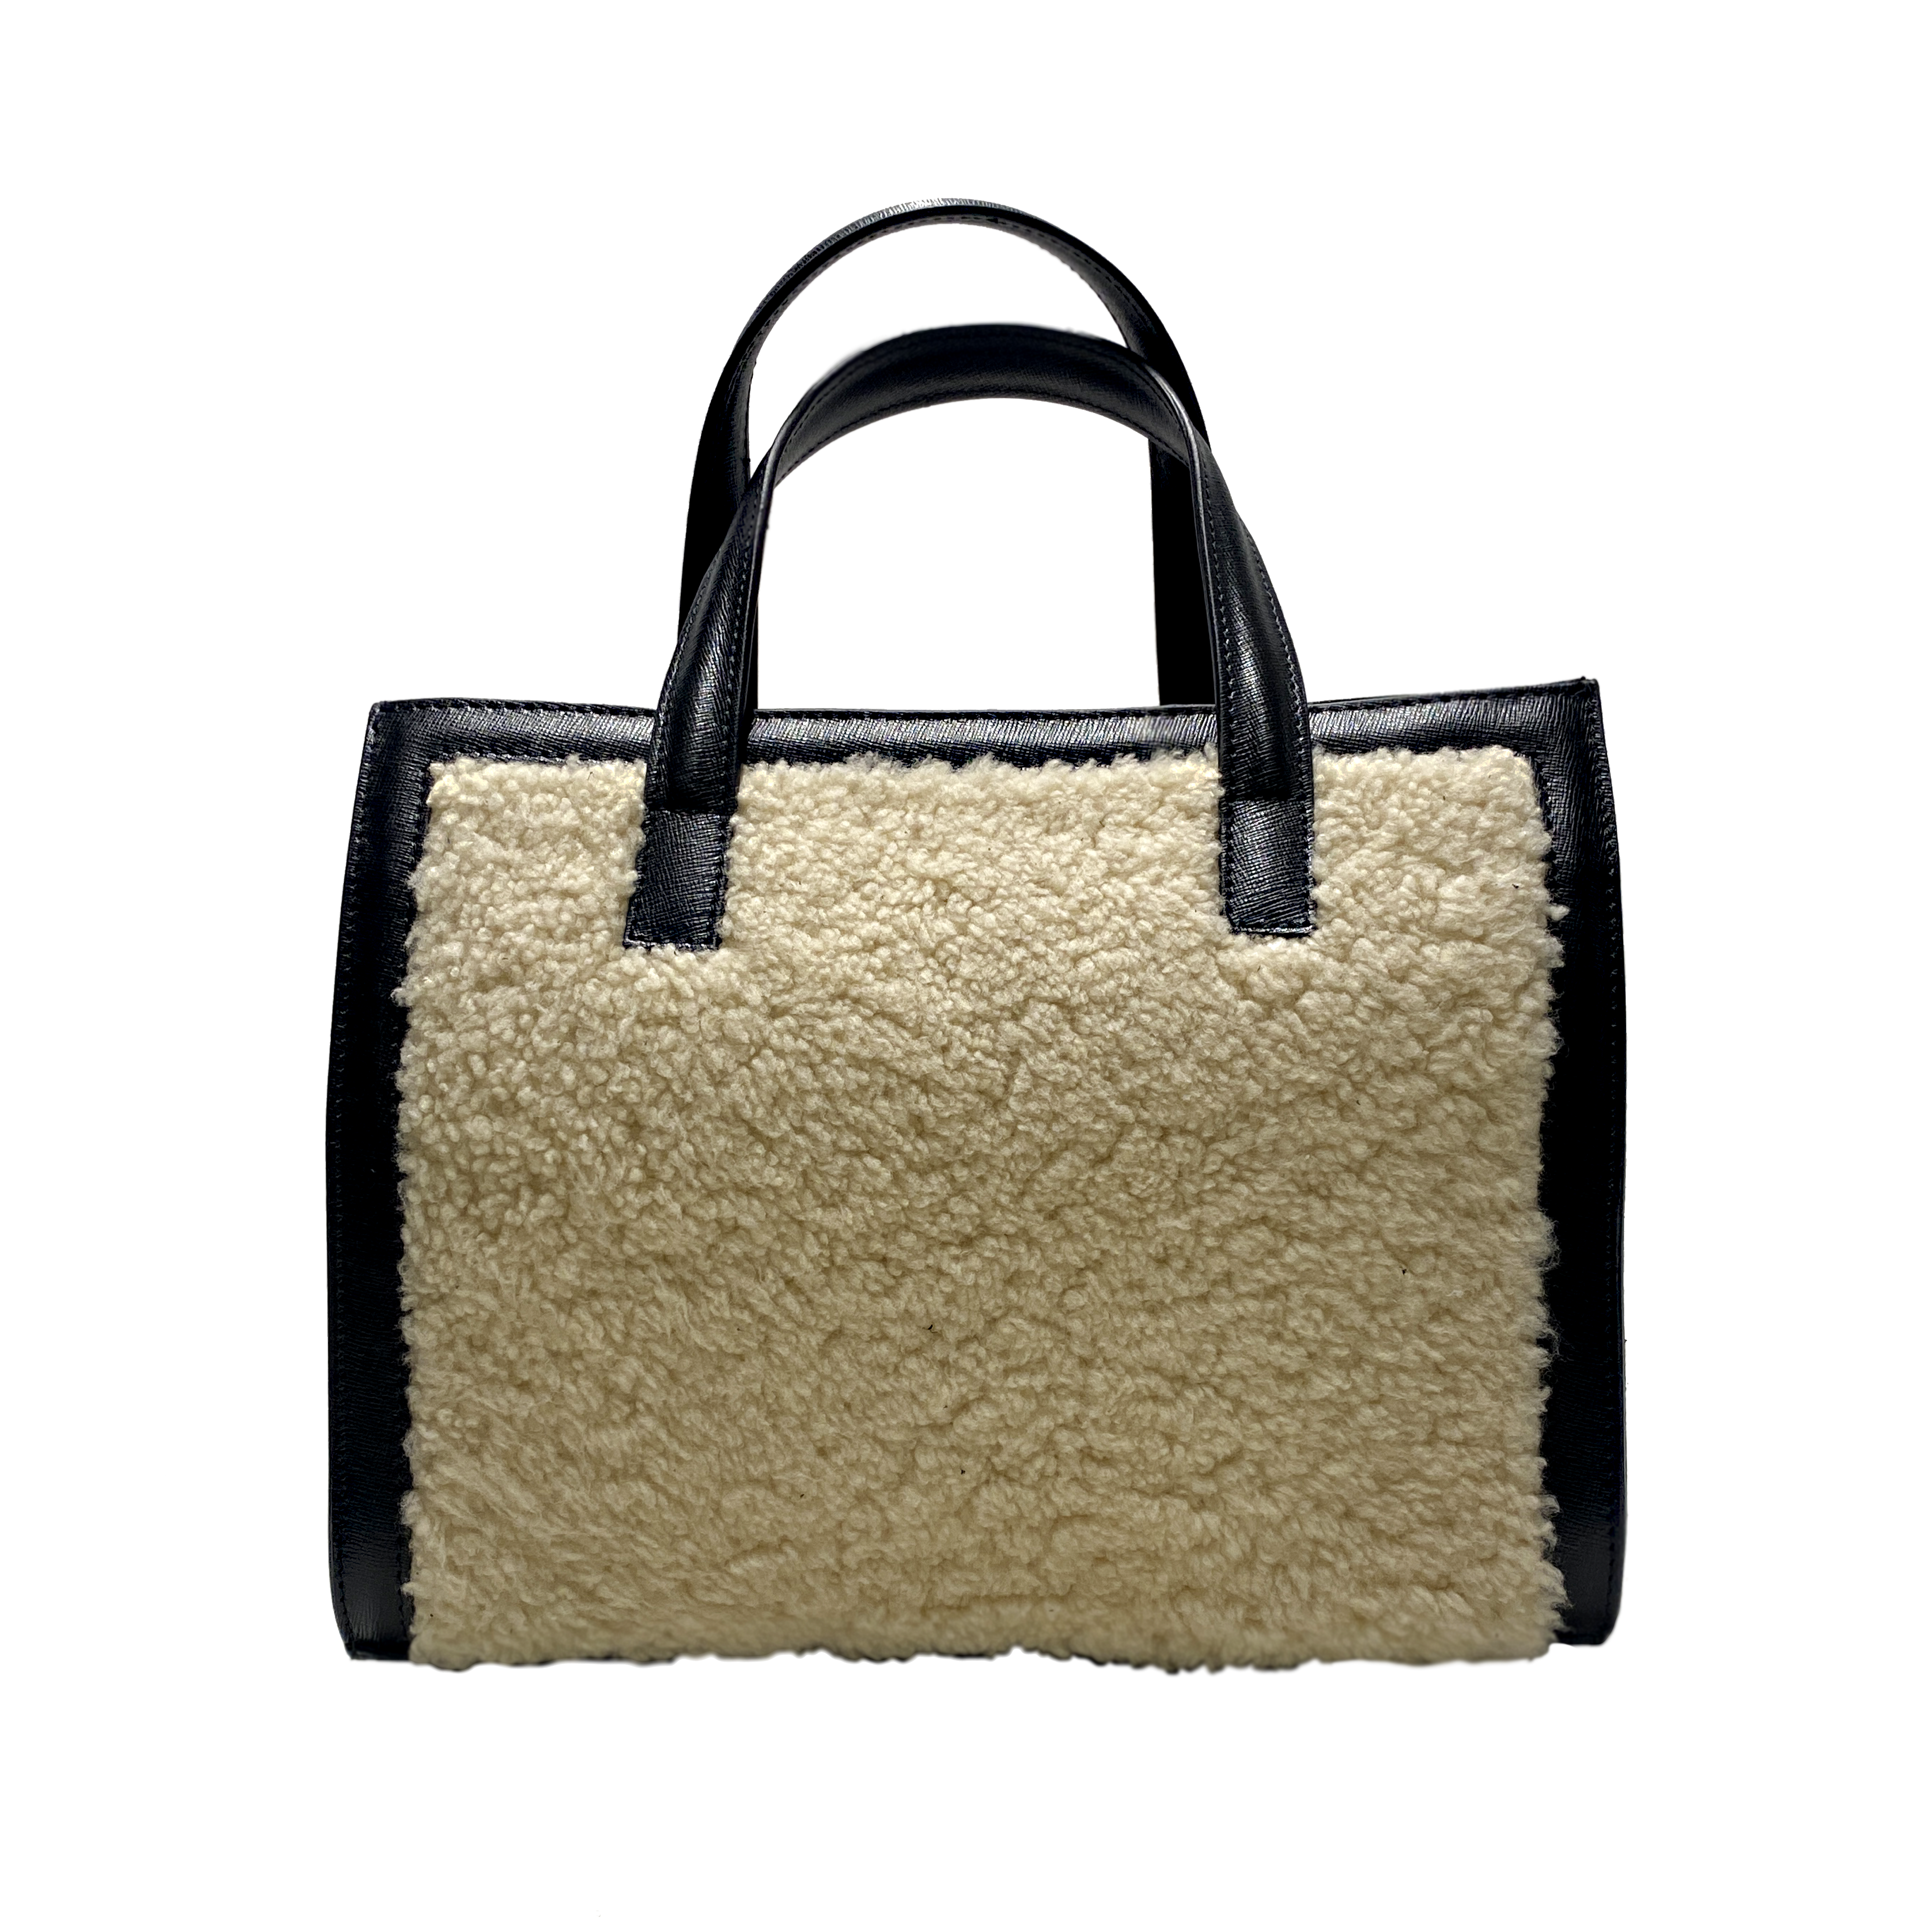 Sophie white shearling, black leather